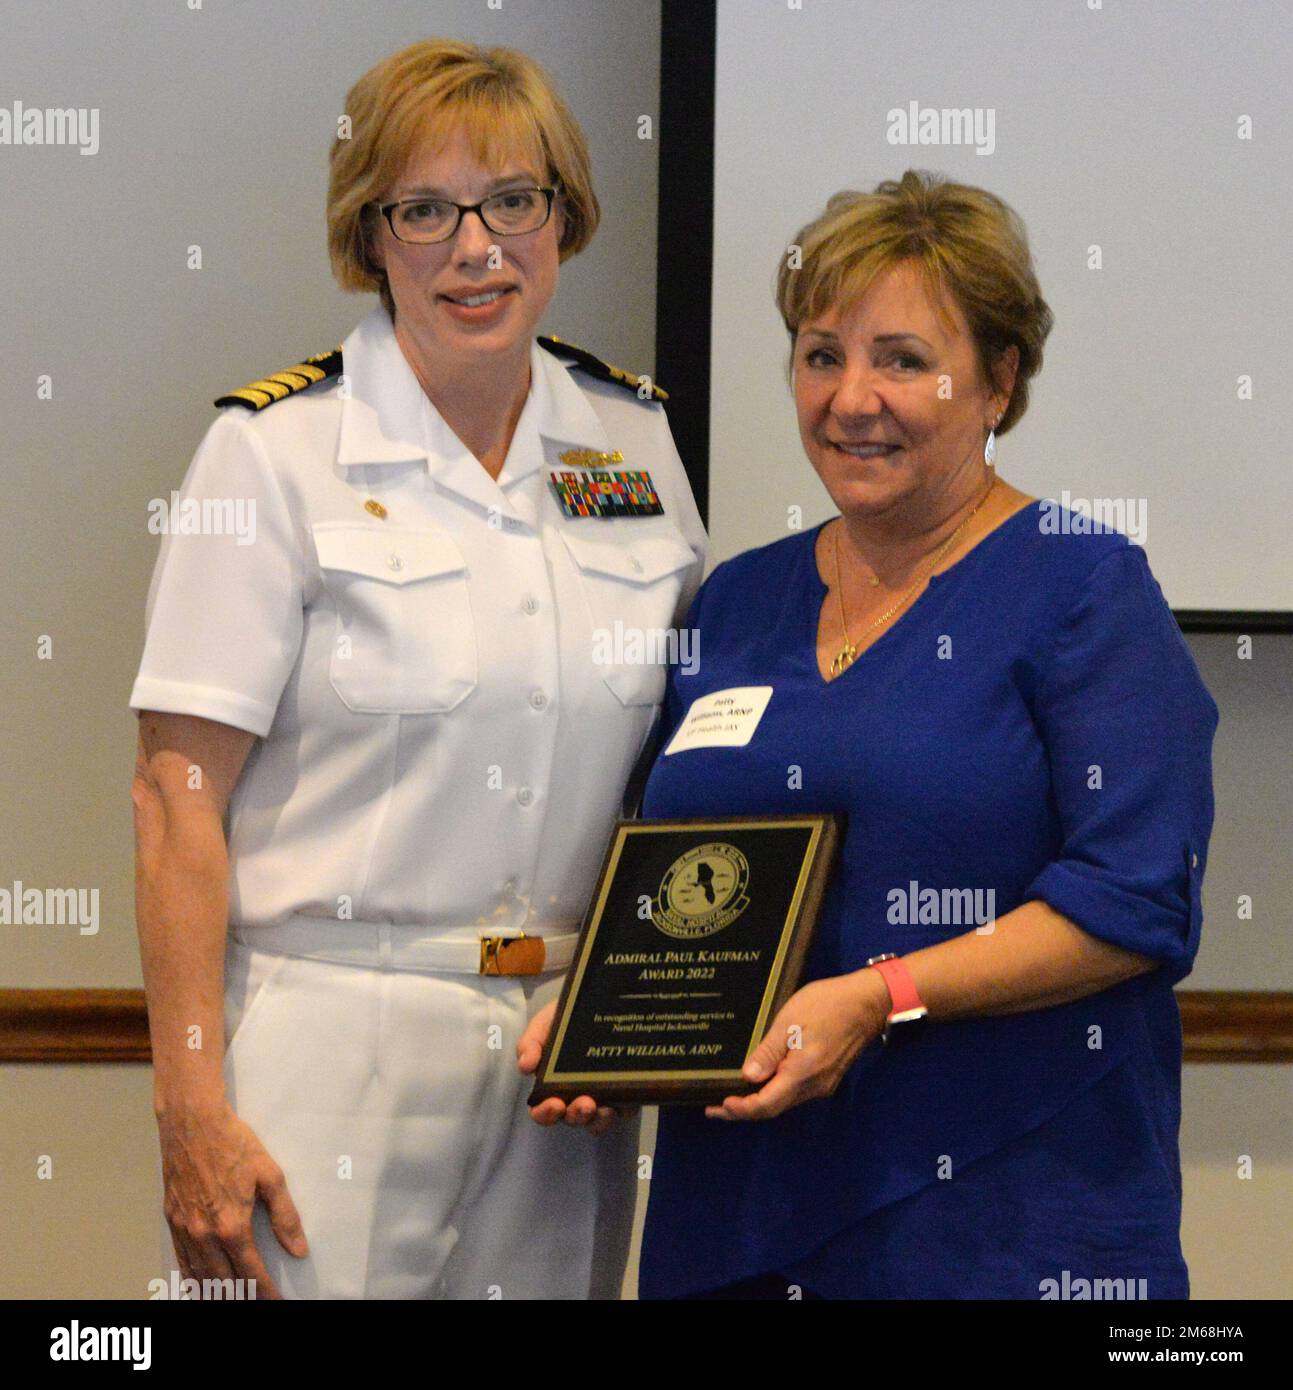 JACKSONVILLE, Fla. (April 19, 2022) – Capt. Teresa Allen, Naval Hospital Jacksonville’s commander, presents the Admiral Paul Kaufman Award to Patty Williams, a neonatal nurse practitioner at University of Florida Health, at the Duval County Medical Society / Navy dinner at Naval Air Station Jacksonville’s Officers Club on April 19.  Founded in 1853, Duval County Medical Society was the first medical society in Florida. Stock Photo